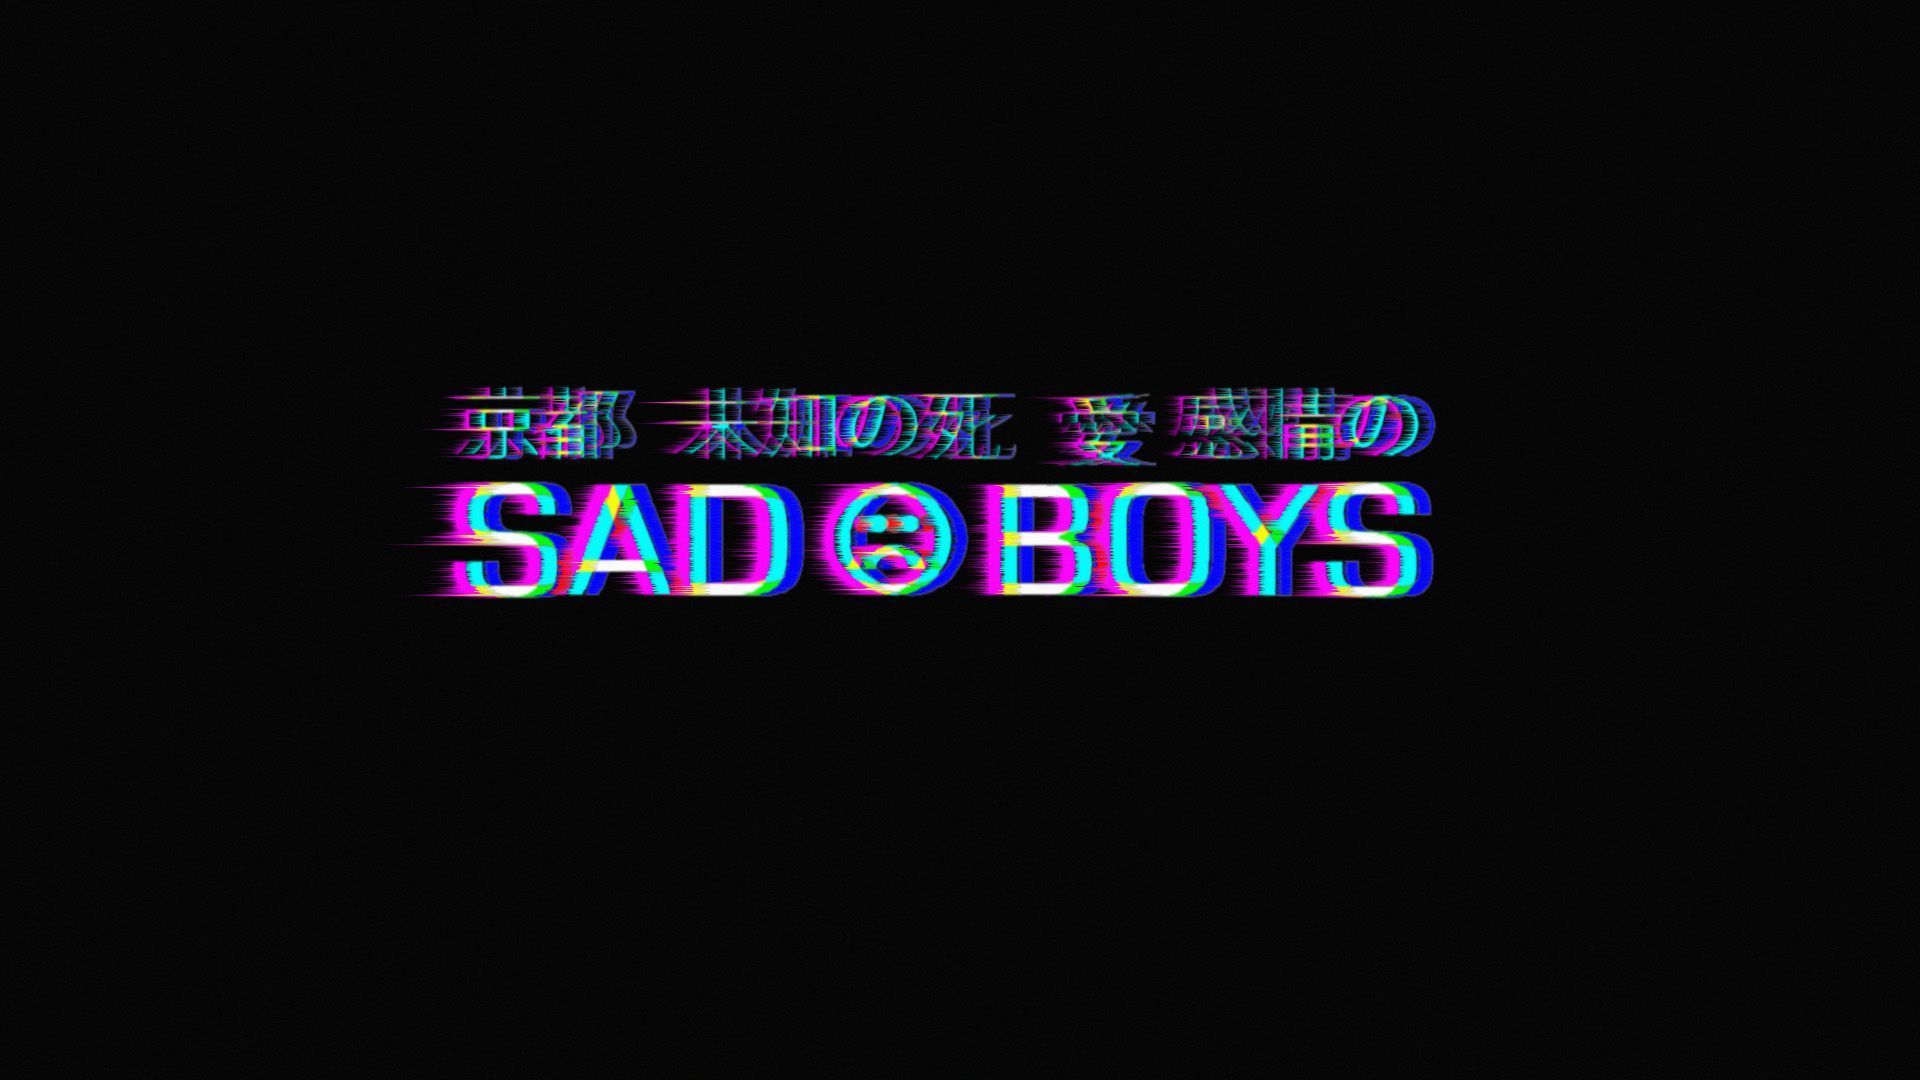 Sad Aesthetic Desktop Wallpapers On Wallpaperdog We hope you enjoy our growing collection of hd images to use as a background or home screen for your smartphone or computer. sad aesthetic desktop wallpapers on